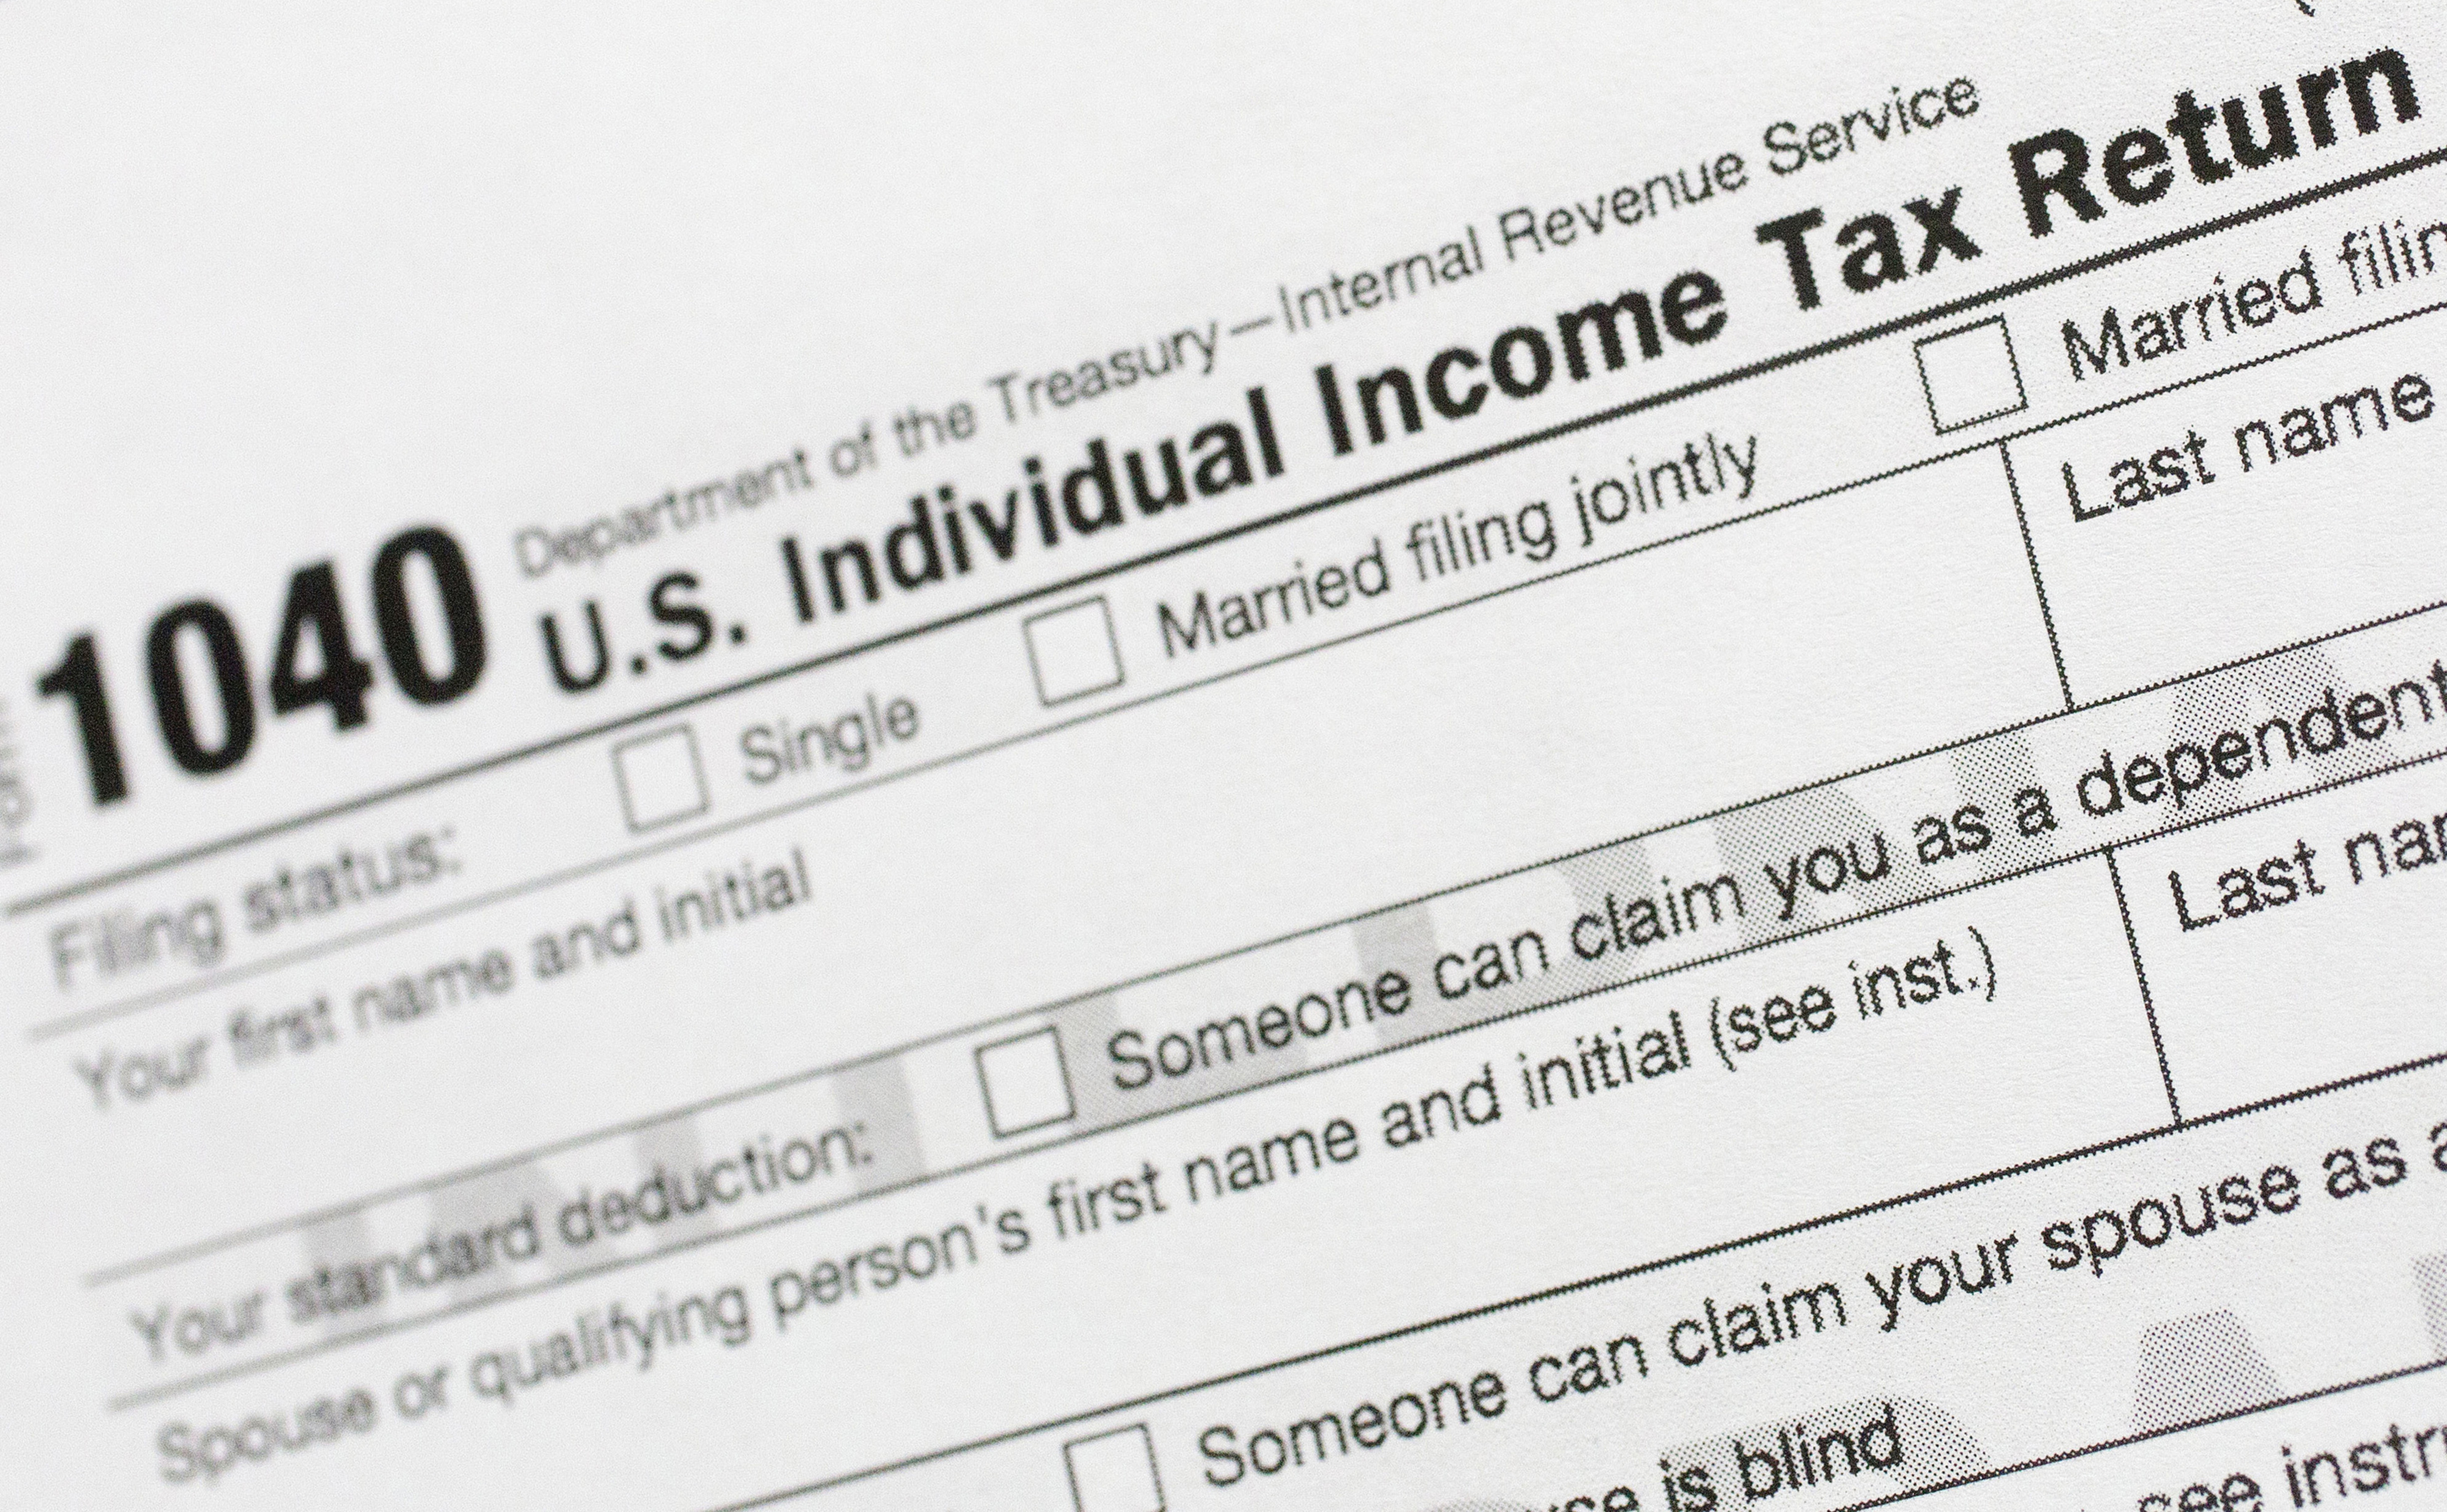 FILE - Part of a 1040 U.S. Individual Income Tax Return form is shown July 24, 2018, in New York. Only 11% of Americans itemize their taxes, which allows them to claim significant tax deductions for charitable donations. (AP Photo/Mark Lennihan, File)